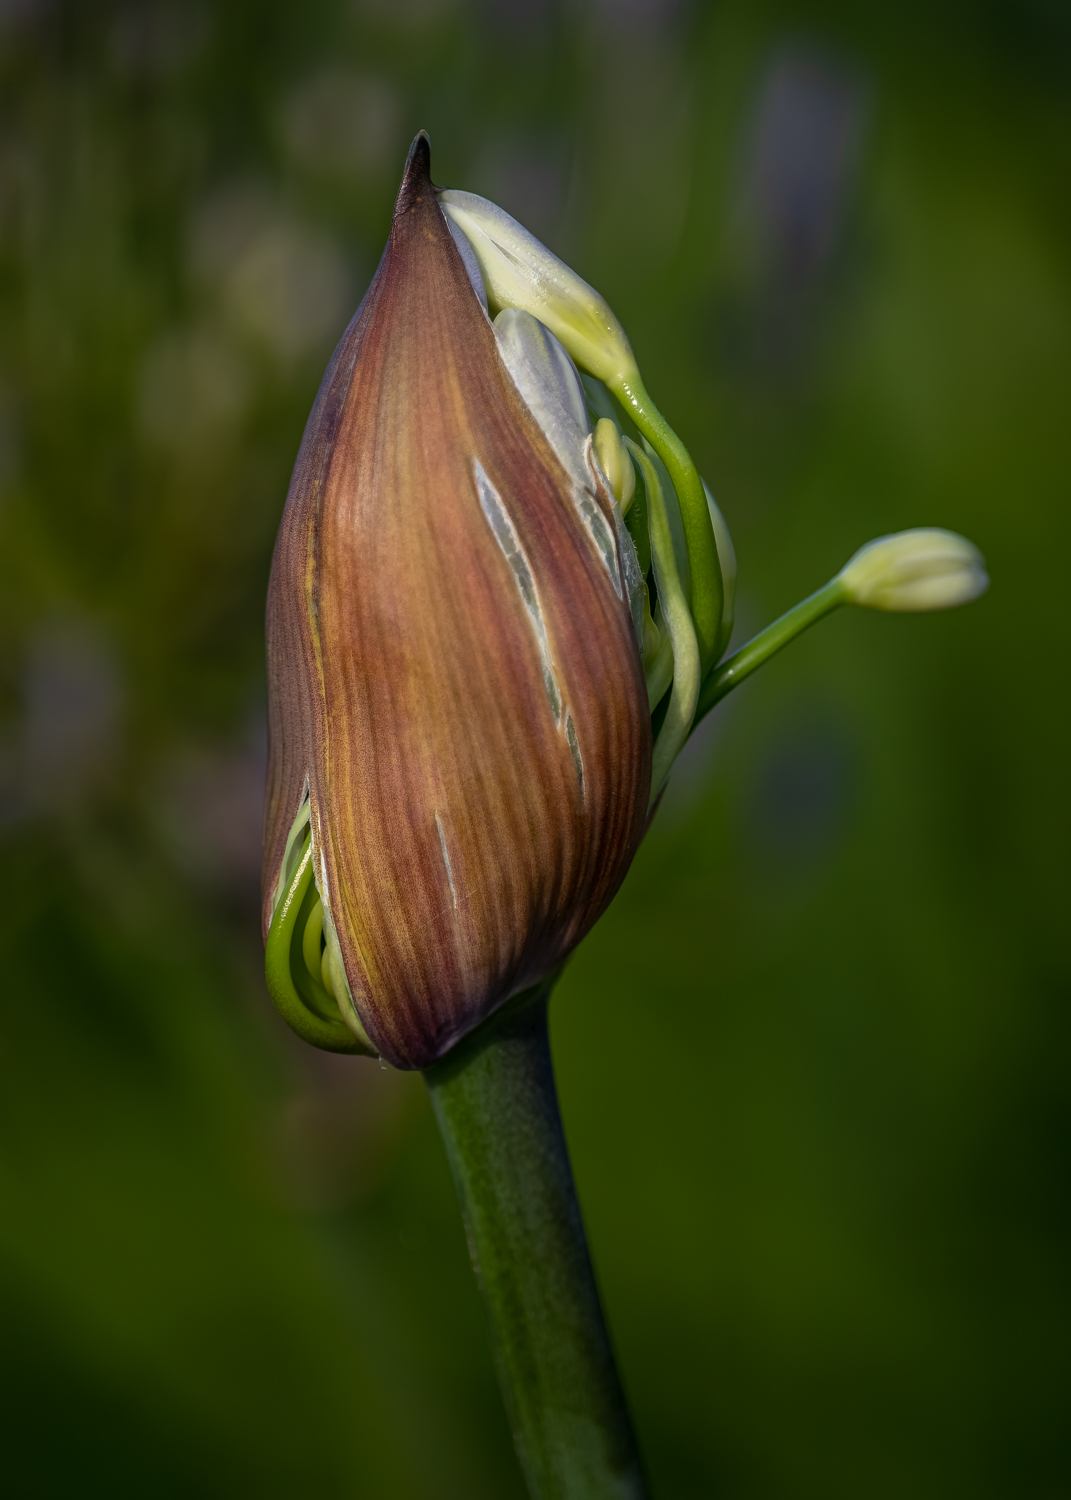 An agapanthus flower bursting out of the bud on two sides